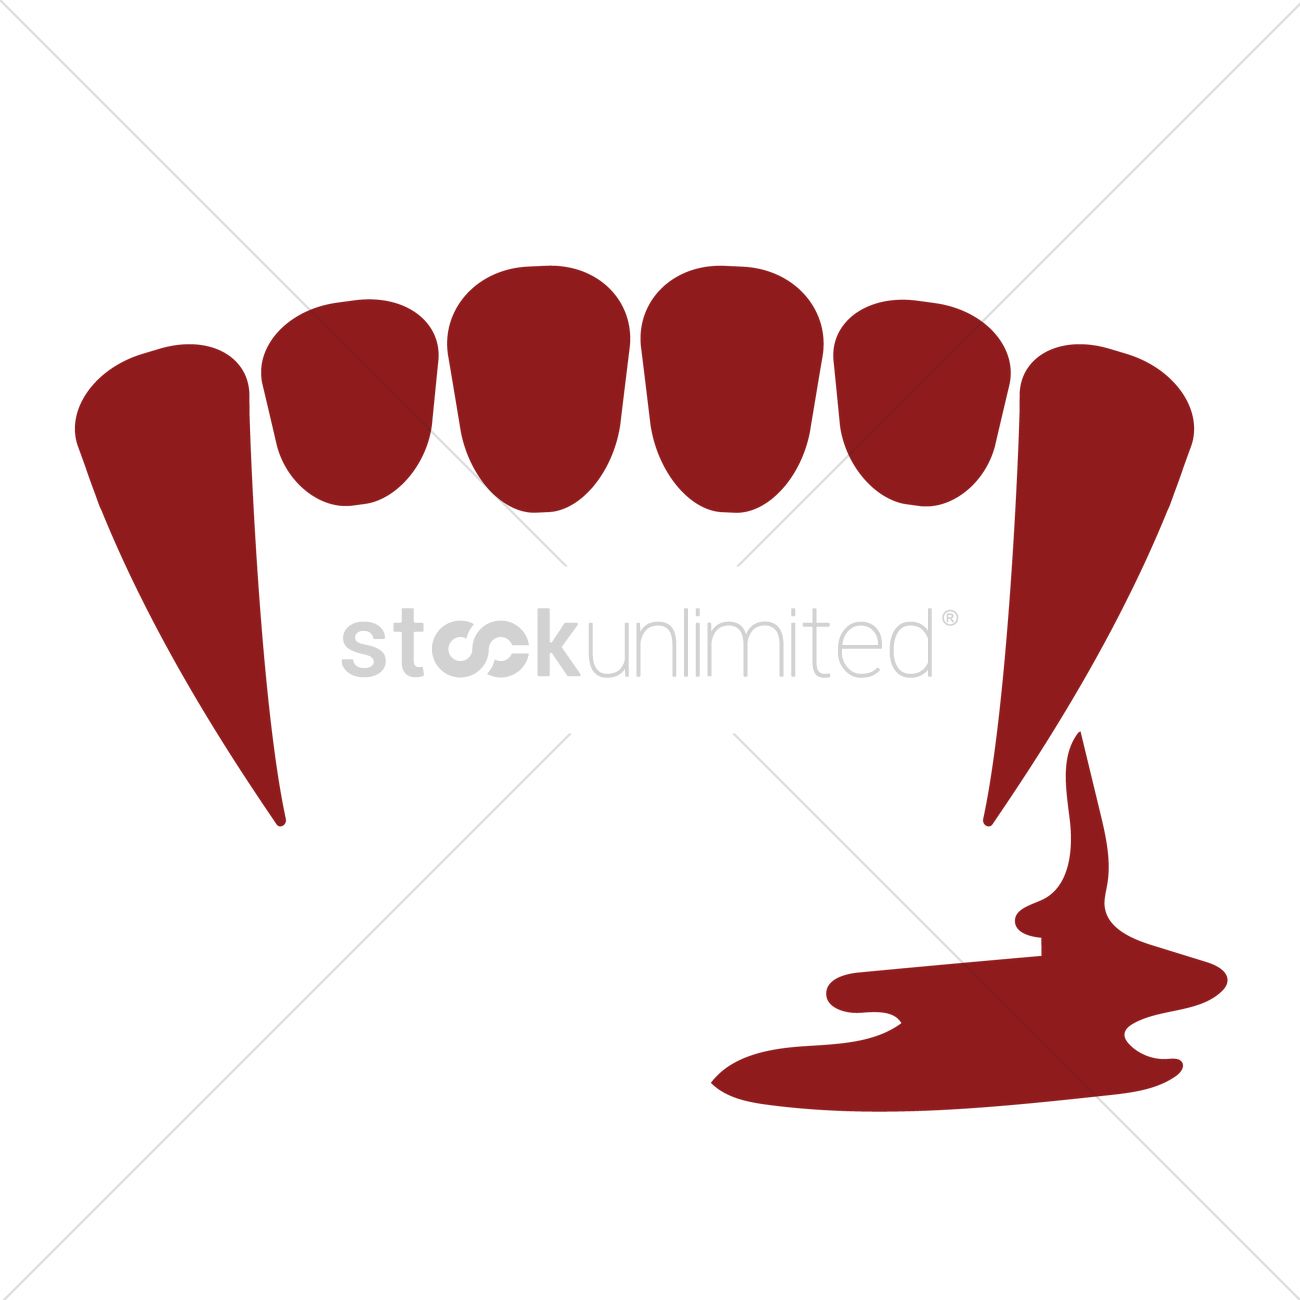 Vampire Teeth Png - Vampire Teeth With Blood Vector Graphic, Transparent background PNG HD thumbnail